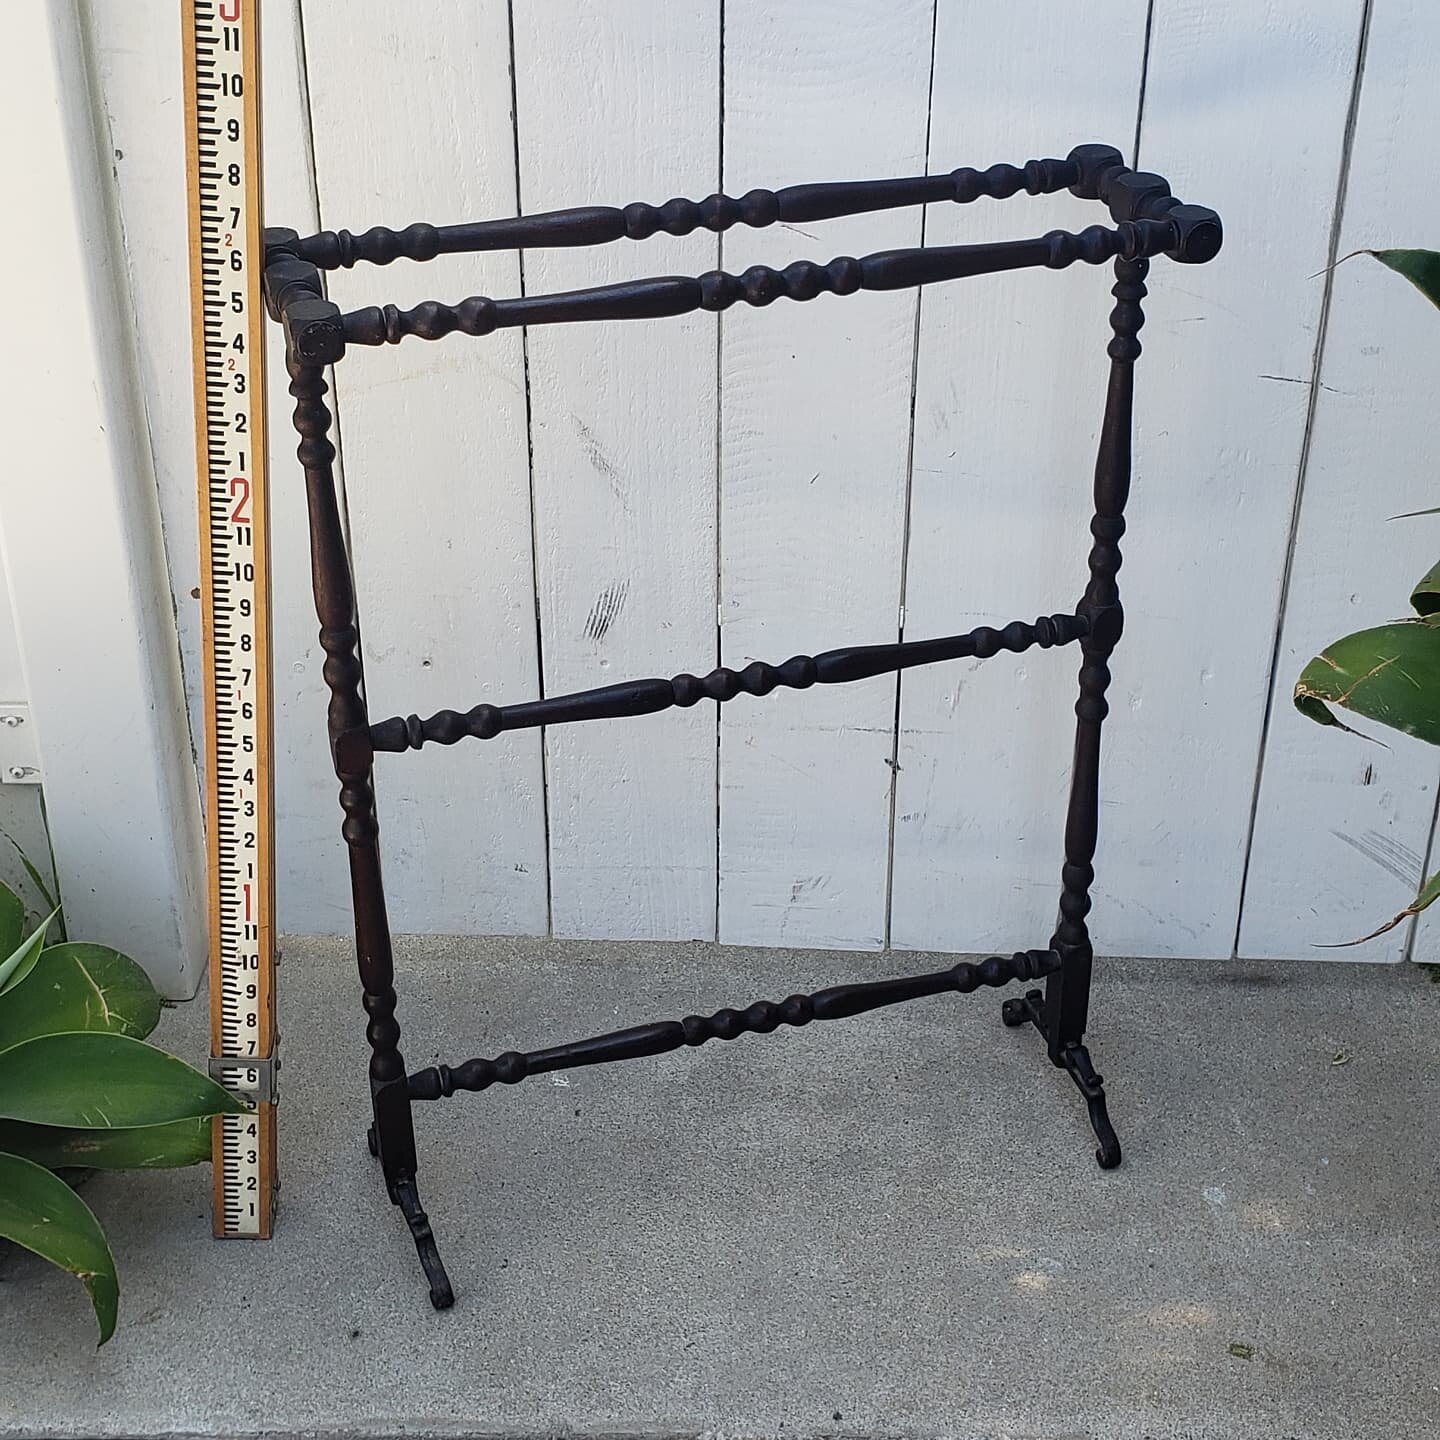 $75. Antique spiral wood quilt blanket holder w/ cast iron metal feet. Works great. 
Plus tax.
This item is located in my Antique Mall booth in the city or Orange. Text Message (don't call) for address and hours.

#orangecircle #downtownorange #orang